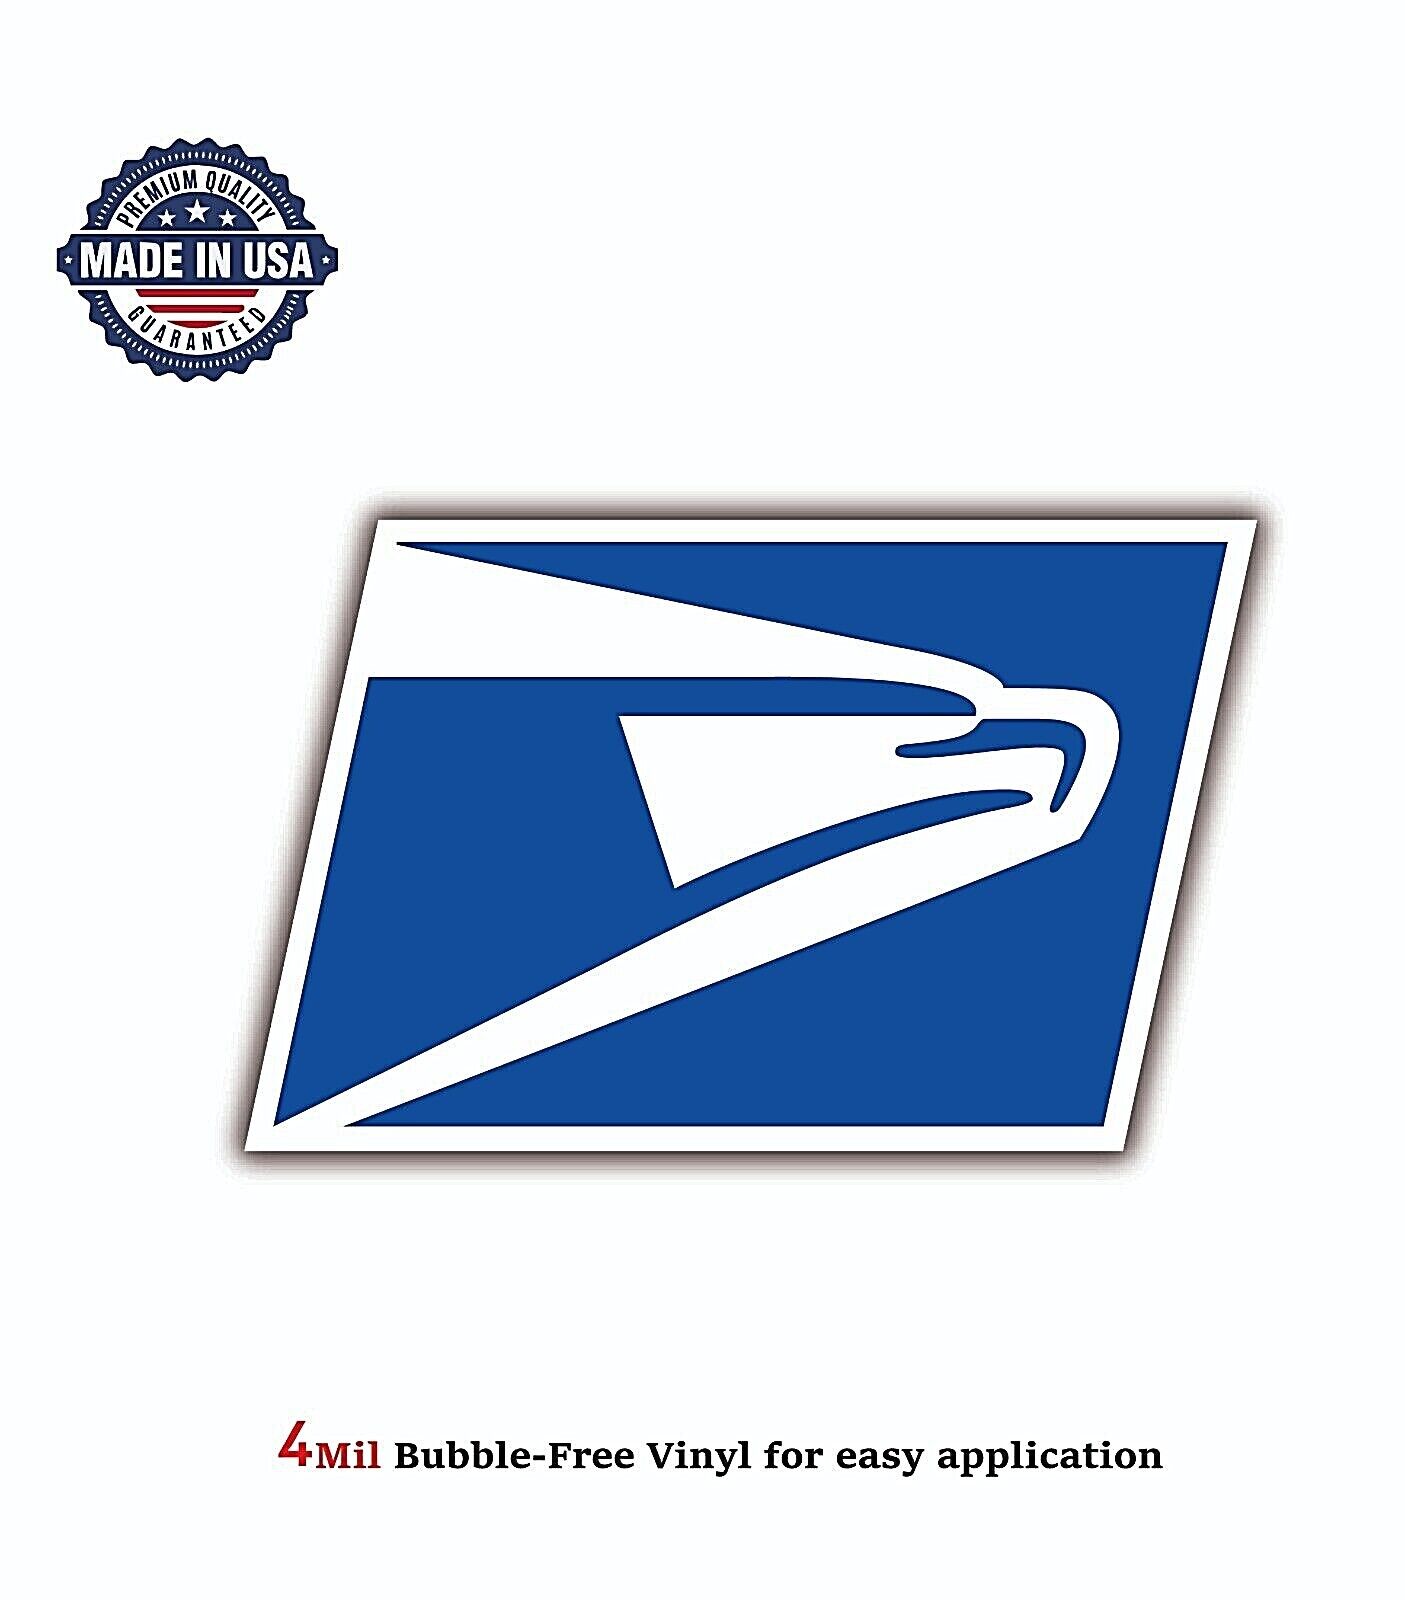 USPS MAIL POSTAL SERVICES VINYL DECAL STICKER CAR BUMPER 4M BUBBLE FREE US MADE